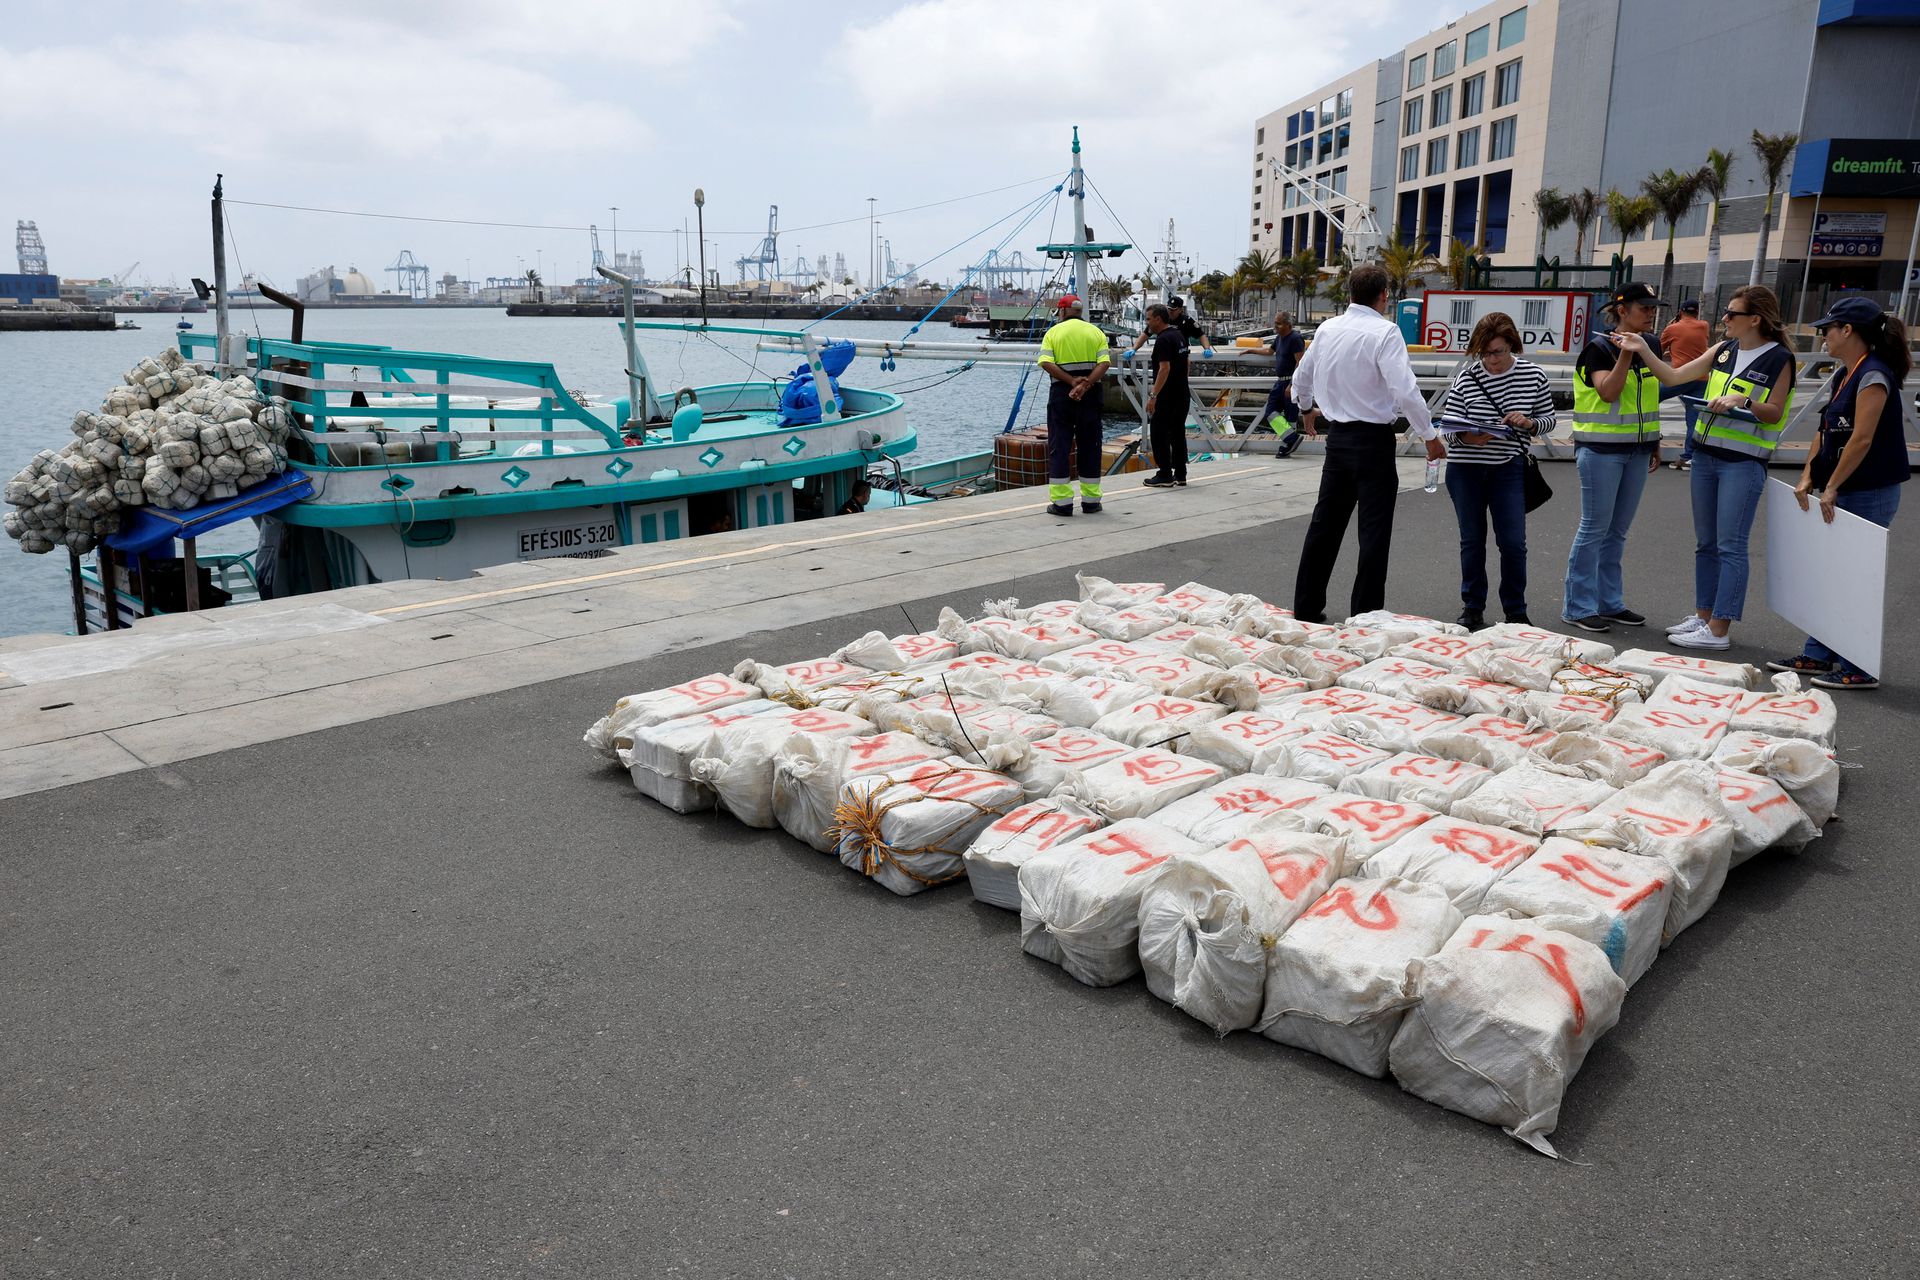 Drugs lie near a Brazilian fishing boat on which they were found, in the port of Las Palmas de Gran Canaria, after its crew members were detained by the Spanish police officers for transporting approximately 1500 kilograms of cocaine on board, Gran Canaria, Spain, May 12, 2023. Photo: Reuters